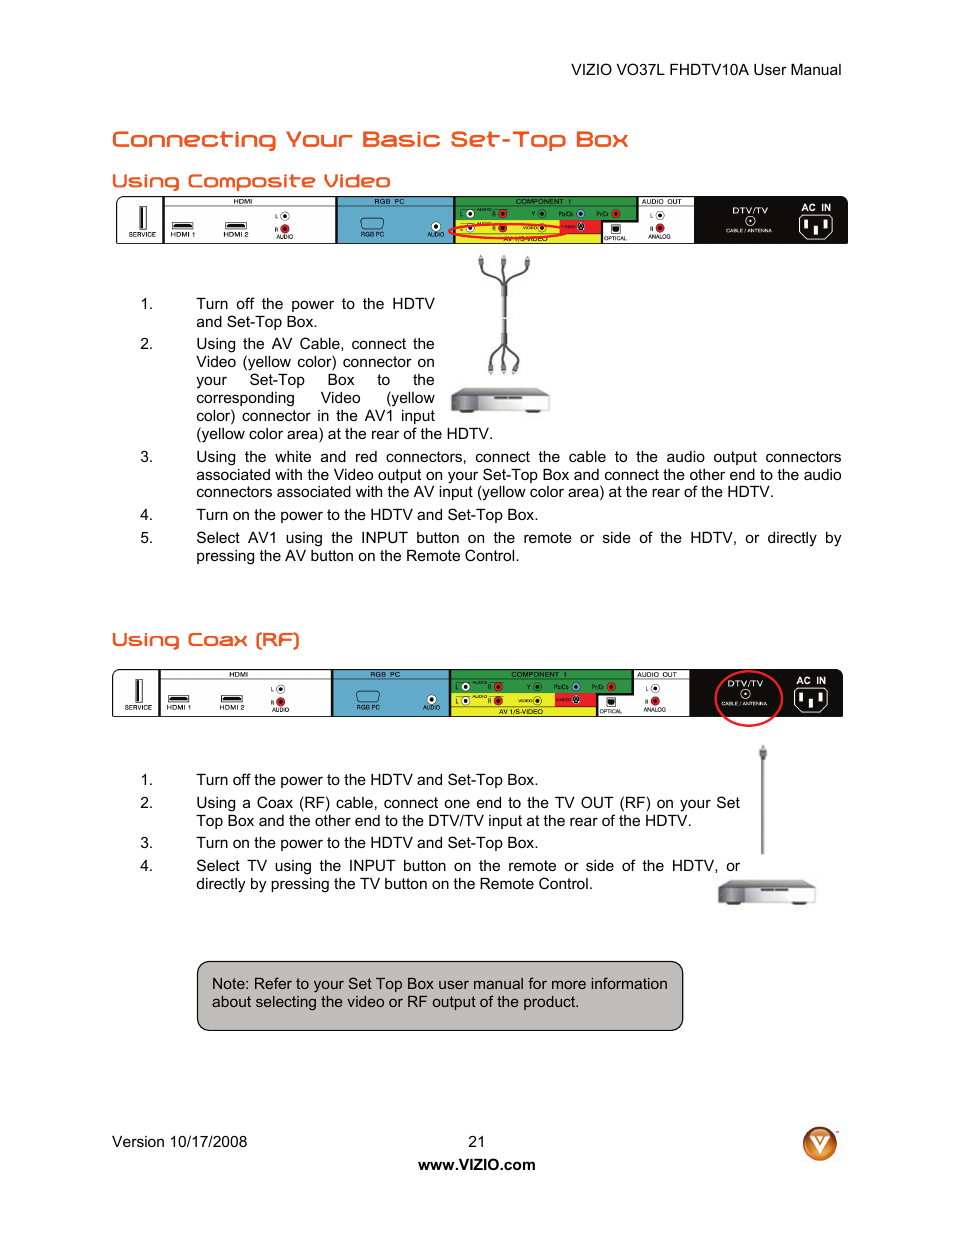 Connecting your basic set-top box | Vizio VO37L FHDTV10A User Manual | Page 21 / 80